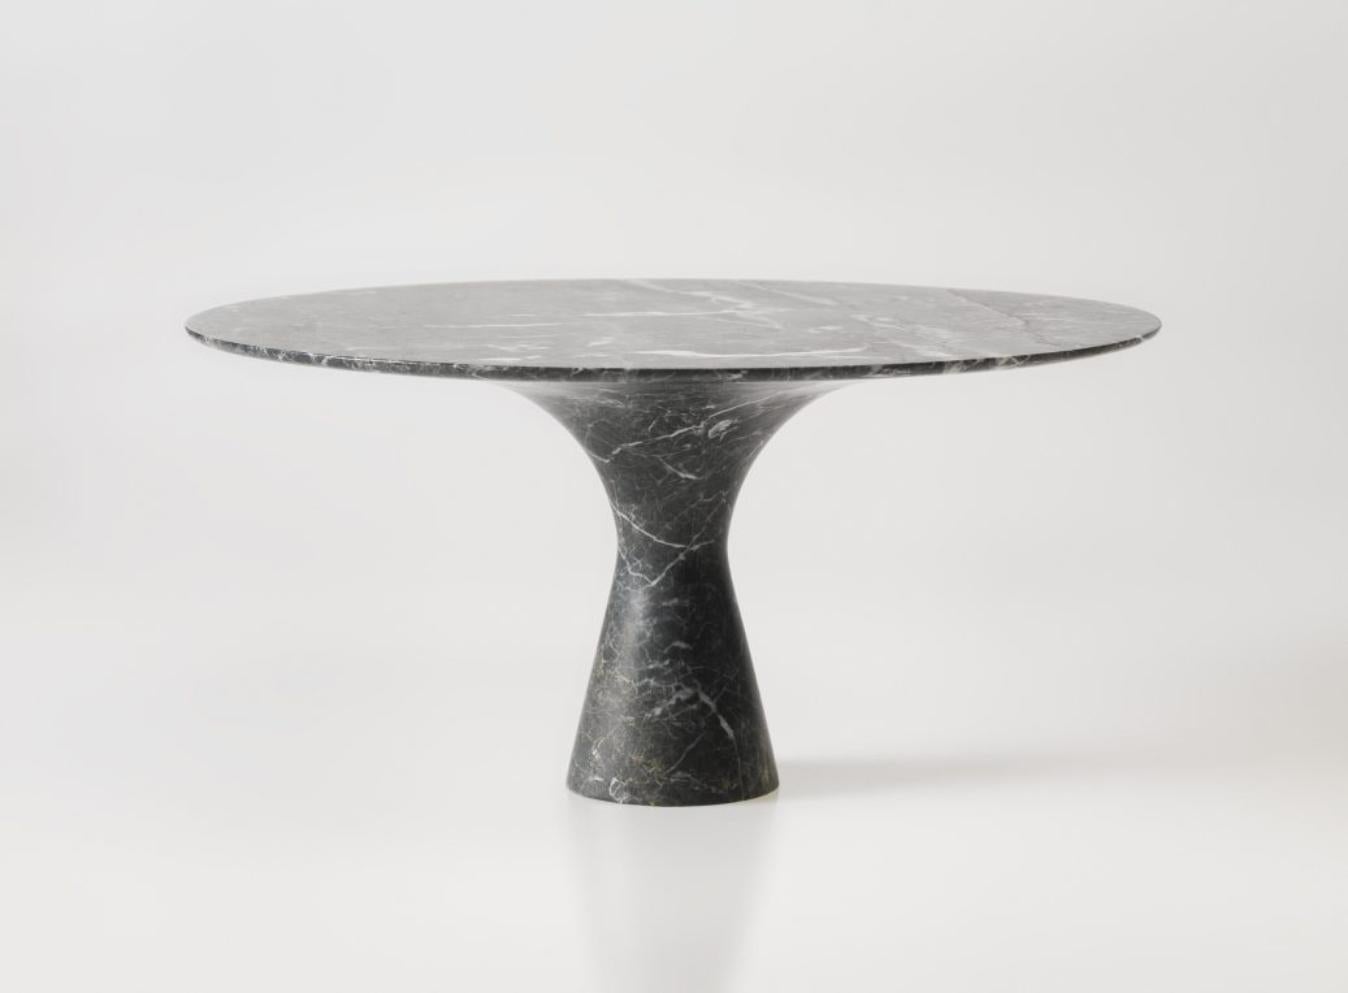 Port Saint Laurent Refined Contemporary Marble Oval Low Table 130/27 For Sale 2